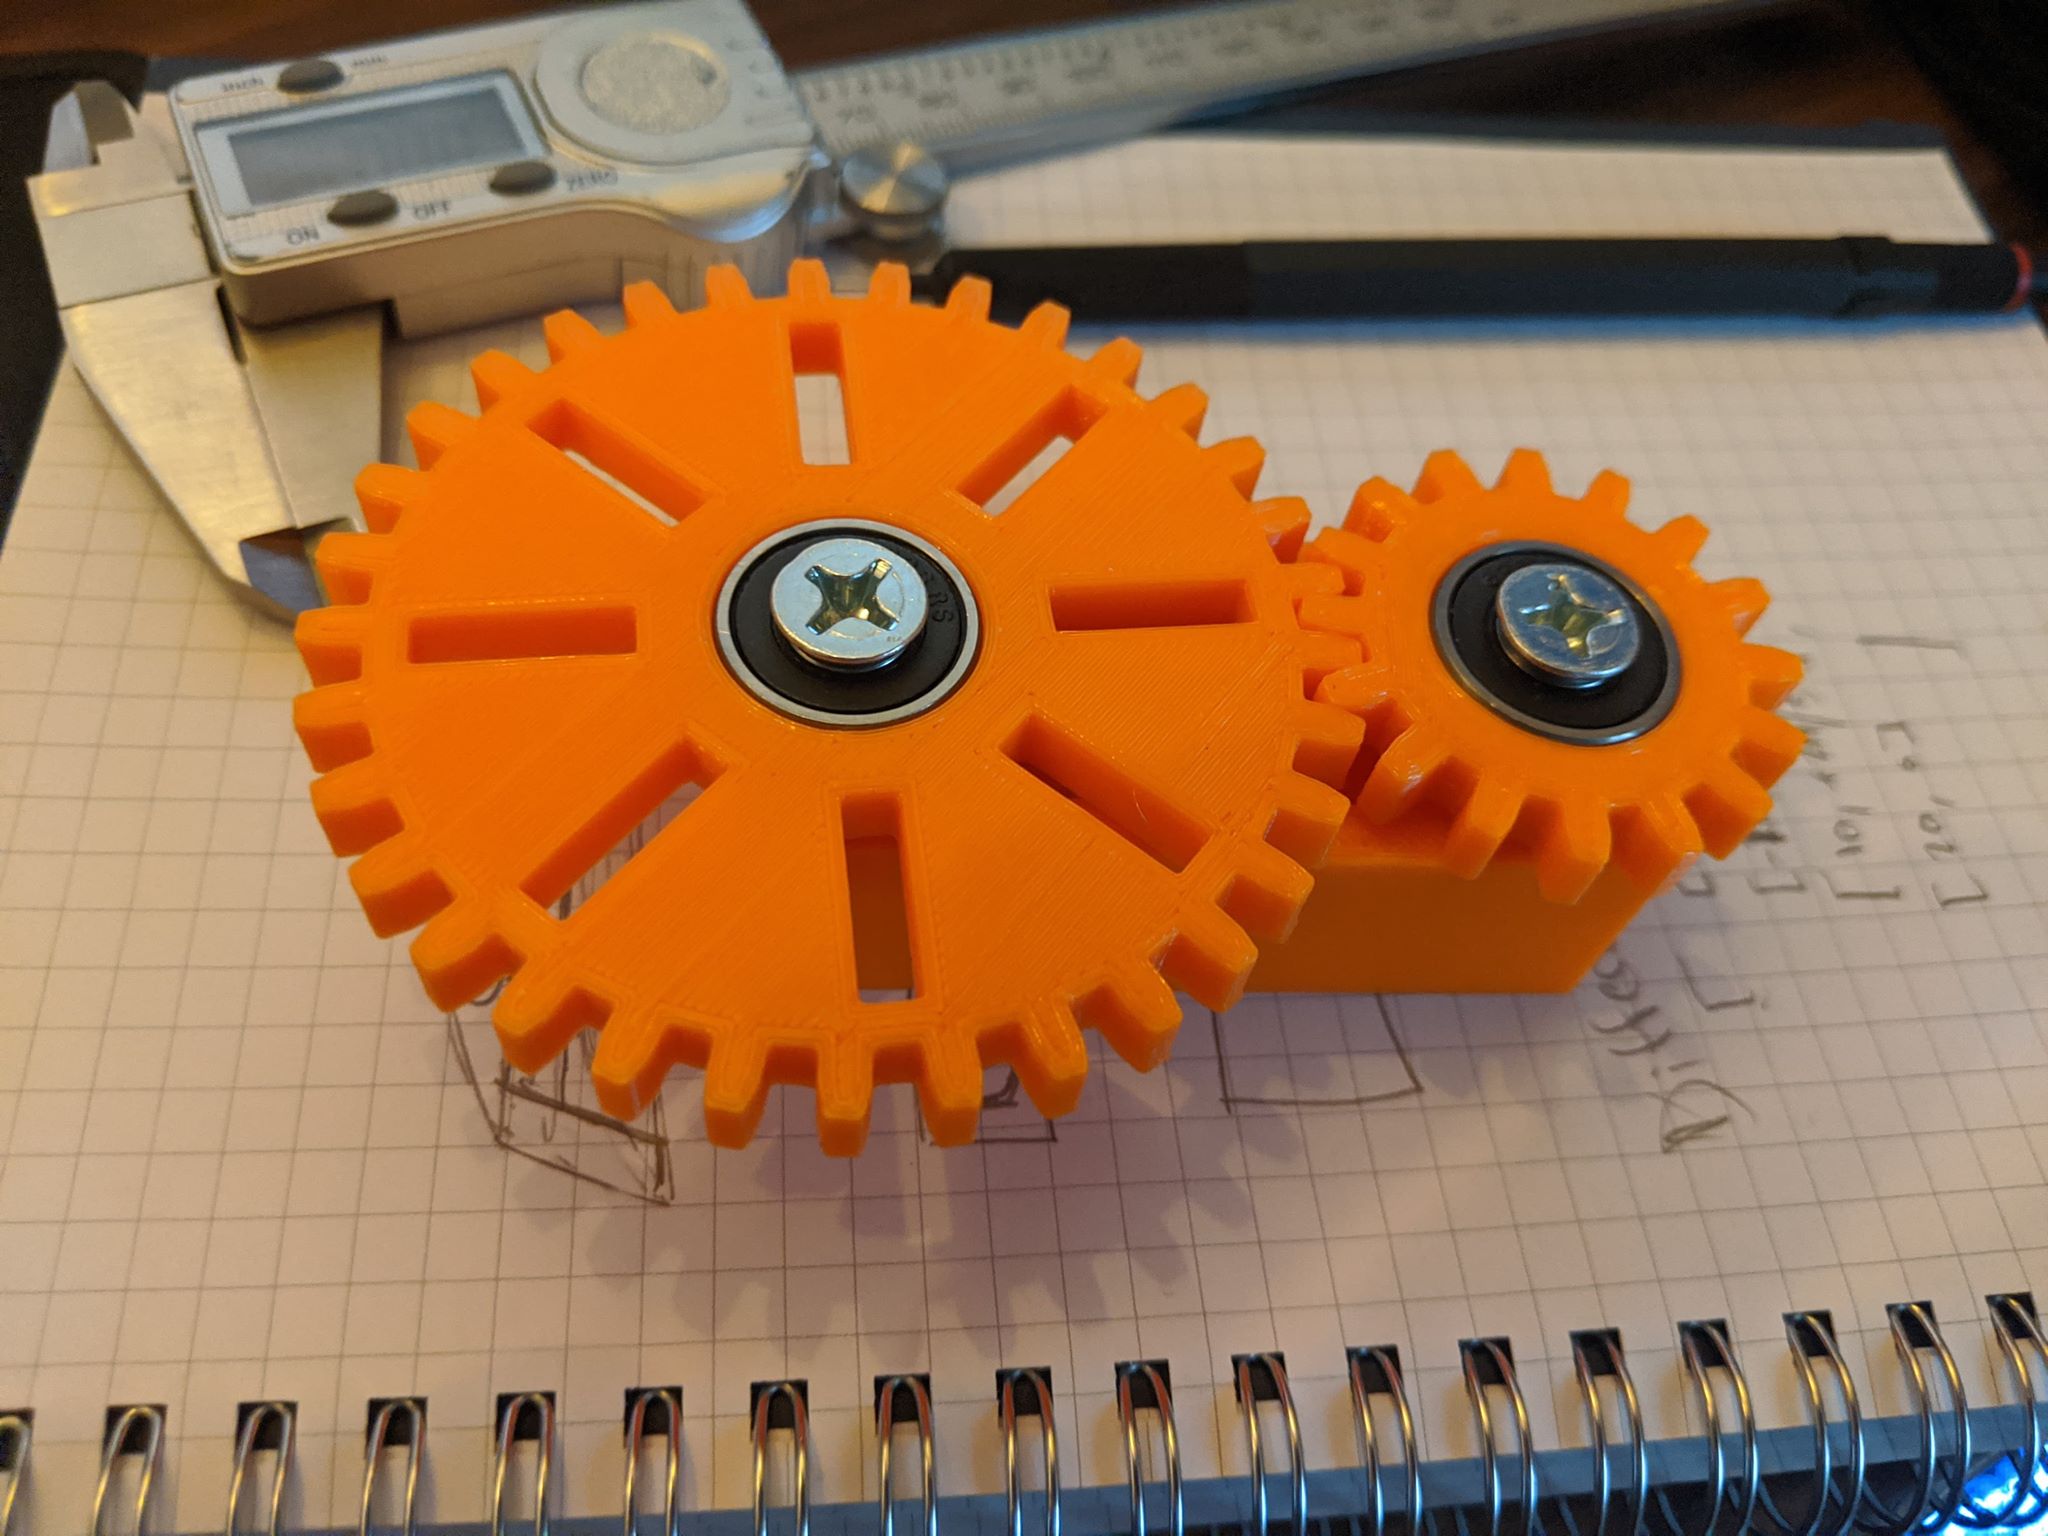 A small library in OpenSCAD that you can use to generate your own spur gear with any parameters.